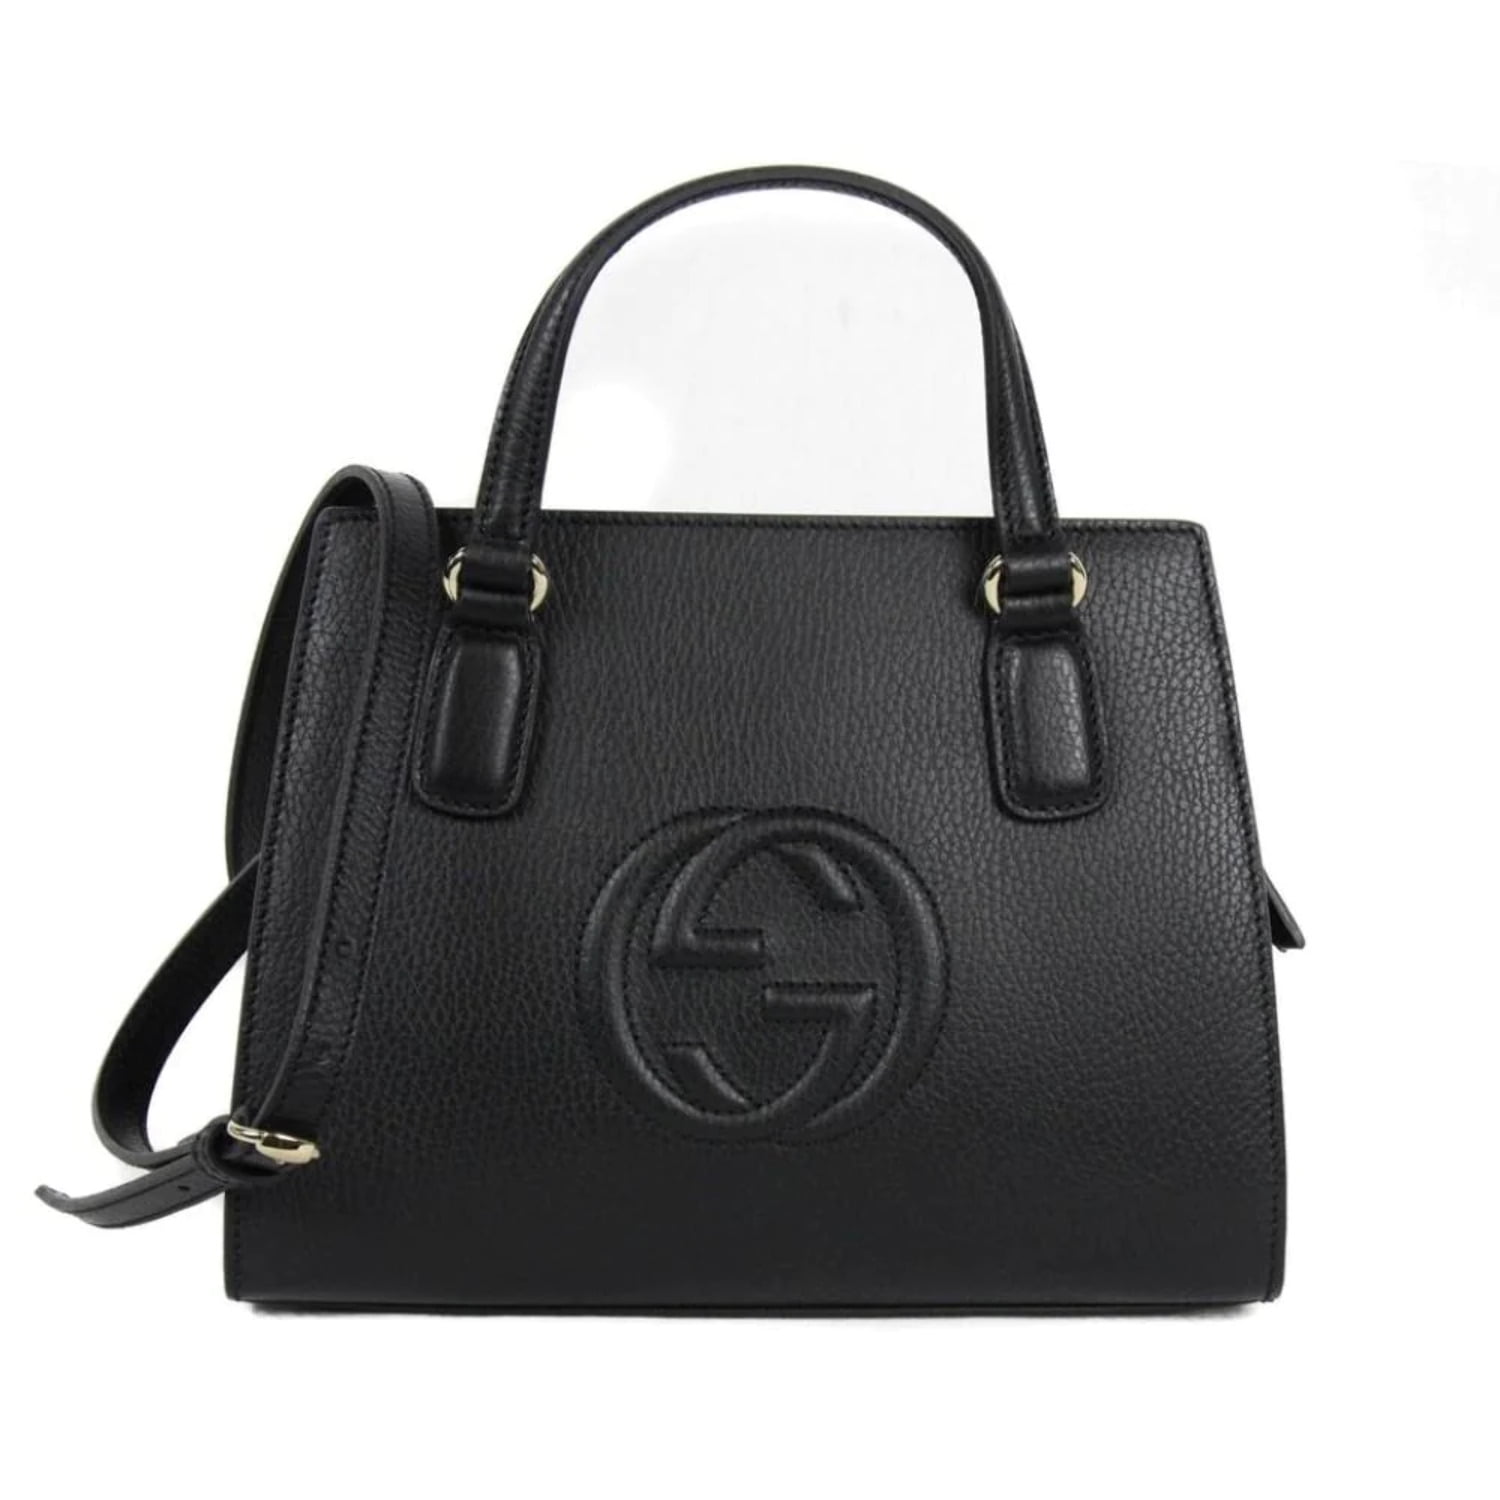 Gg marmont leather handbag Gucci Black in Leather - 36320745